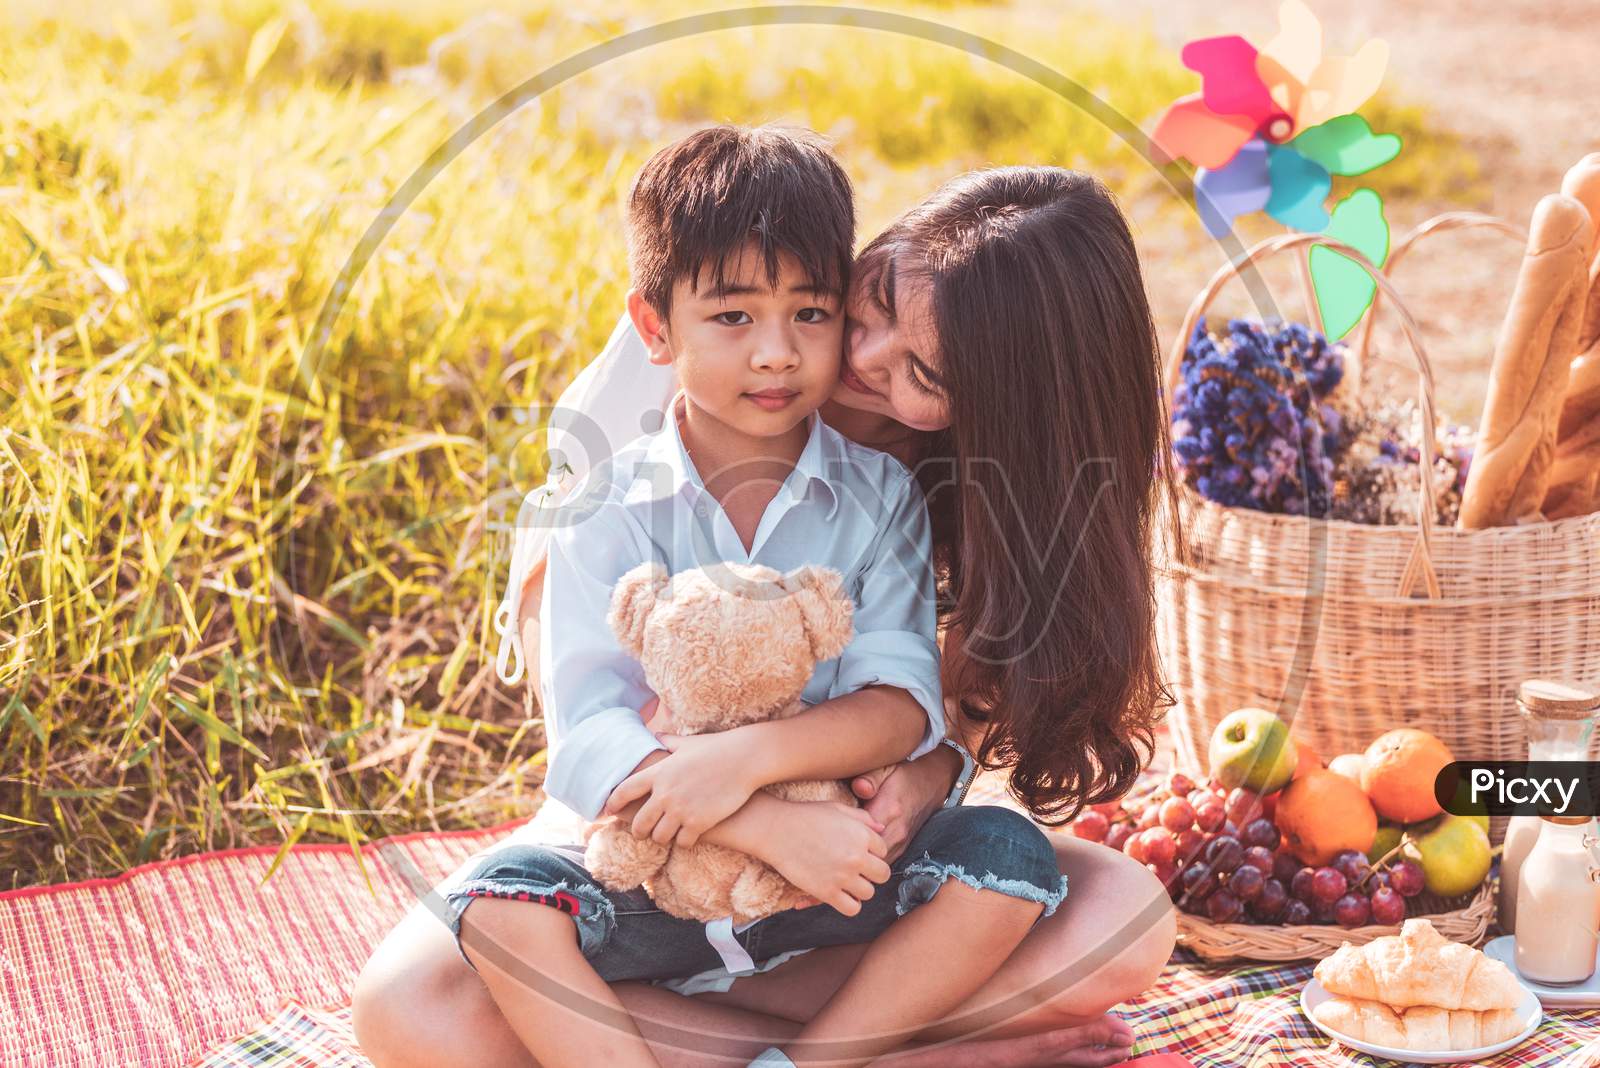 Little Asian Boy Kissed At Cheek By His Mom In Meadow When Doing Picnic. Mother And Son Playing Together. Celebrating In Mother Day And Appreciating Concept. Summer People And Lifestyle Theme.